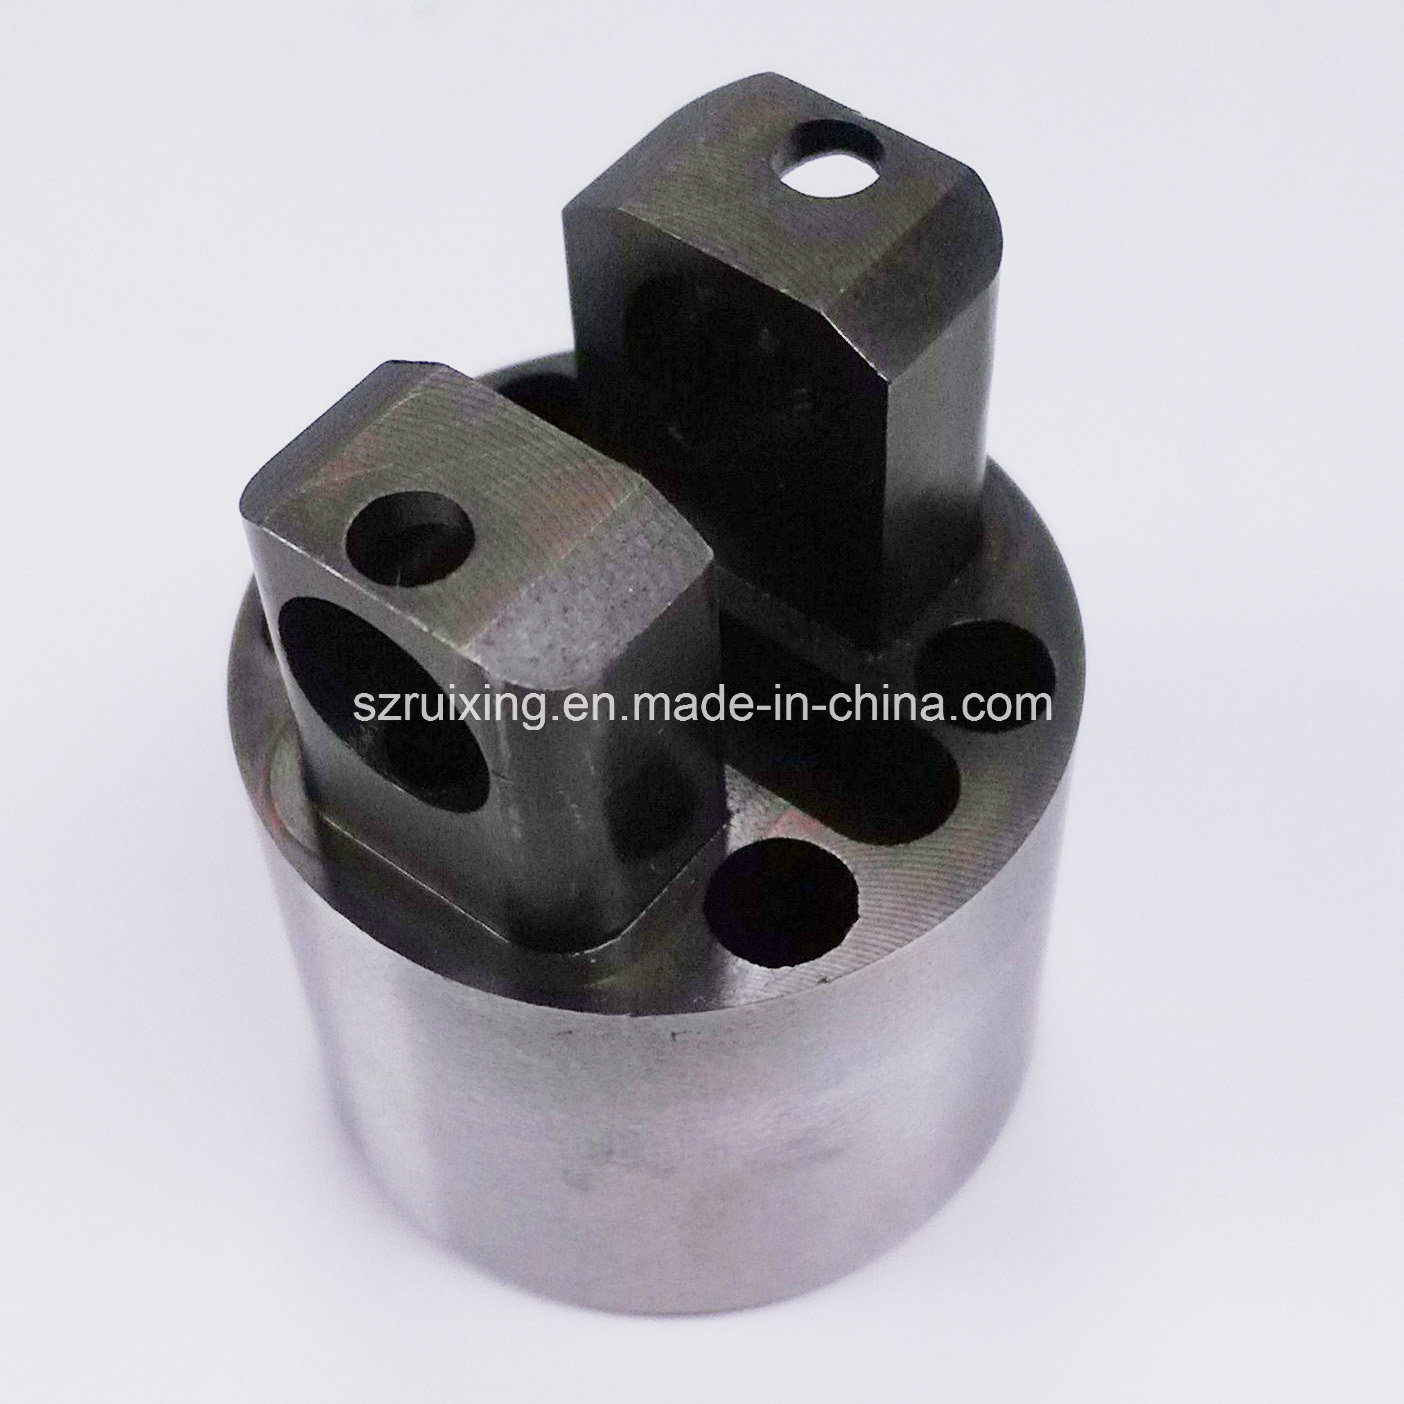 Hardware Machining Part with Grinding